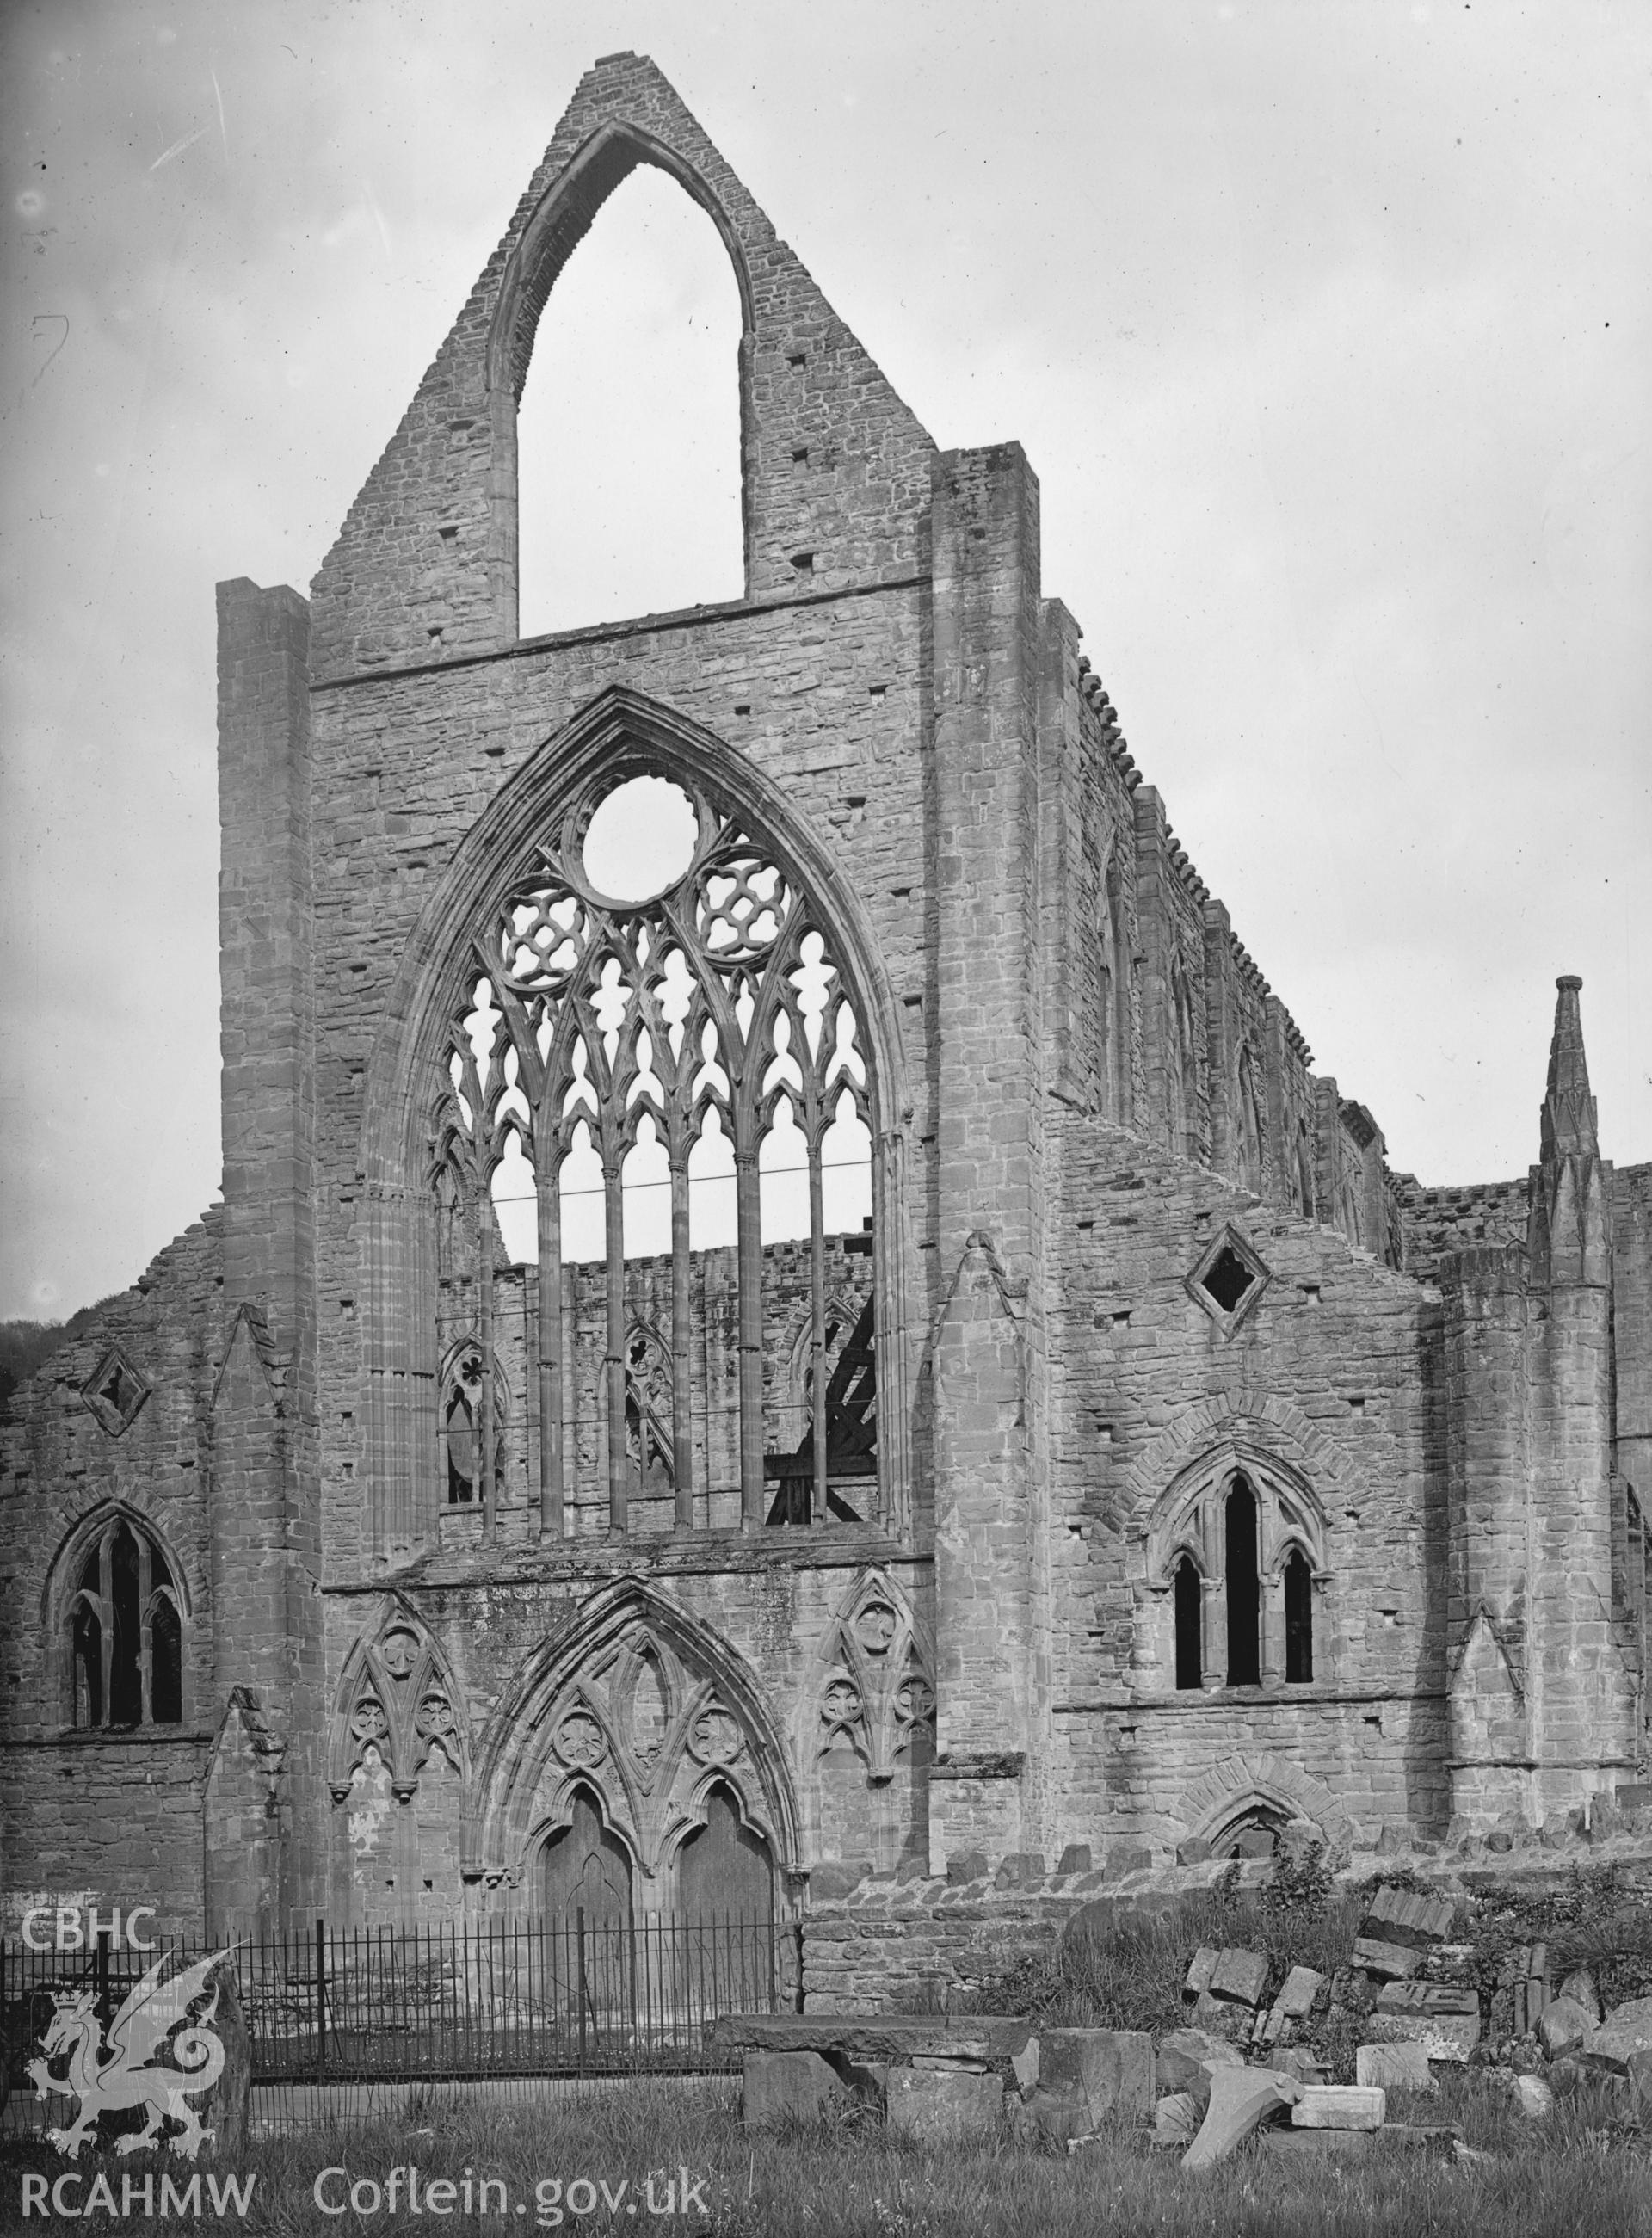 Digital copy of a photograph showing the west front of Tintern Abbey, taken by F H Crossley, c.1948.